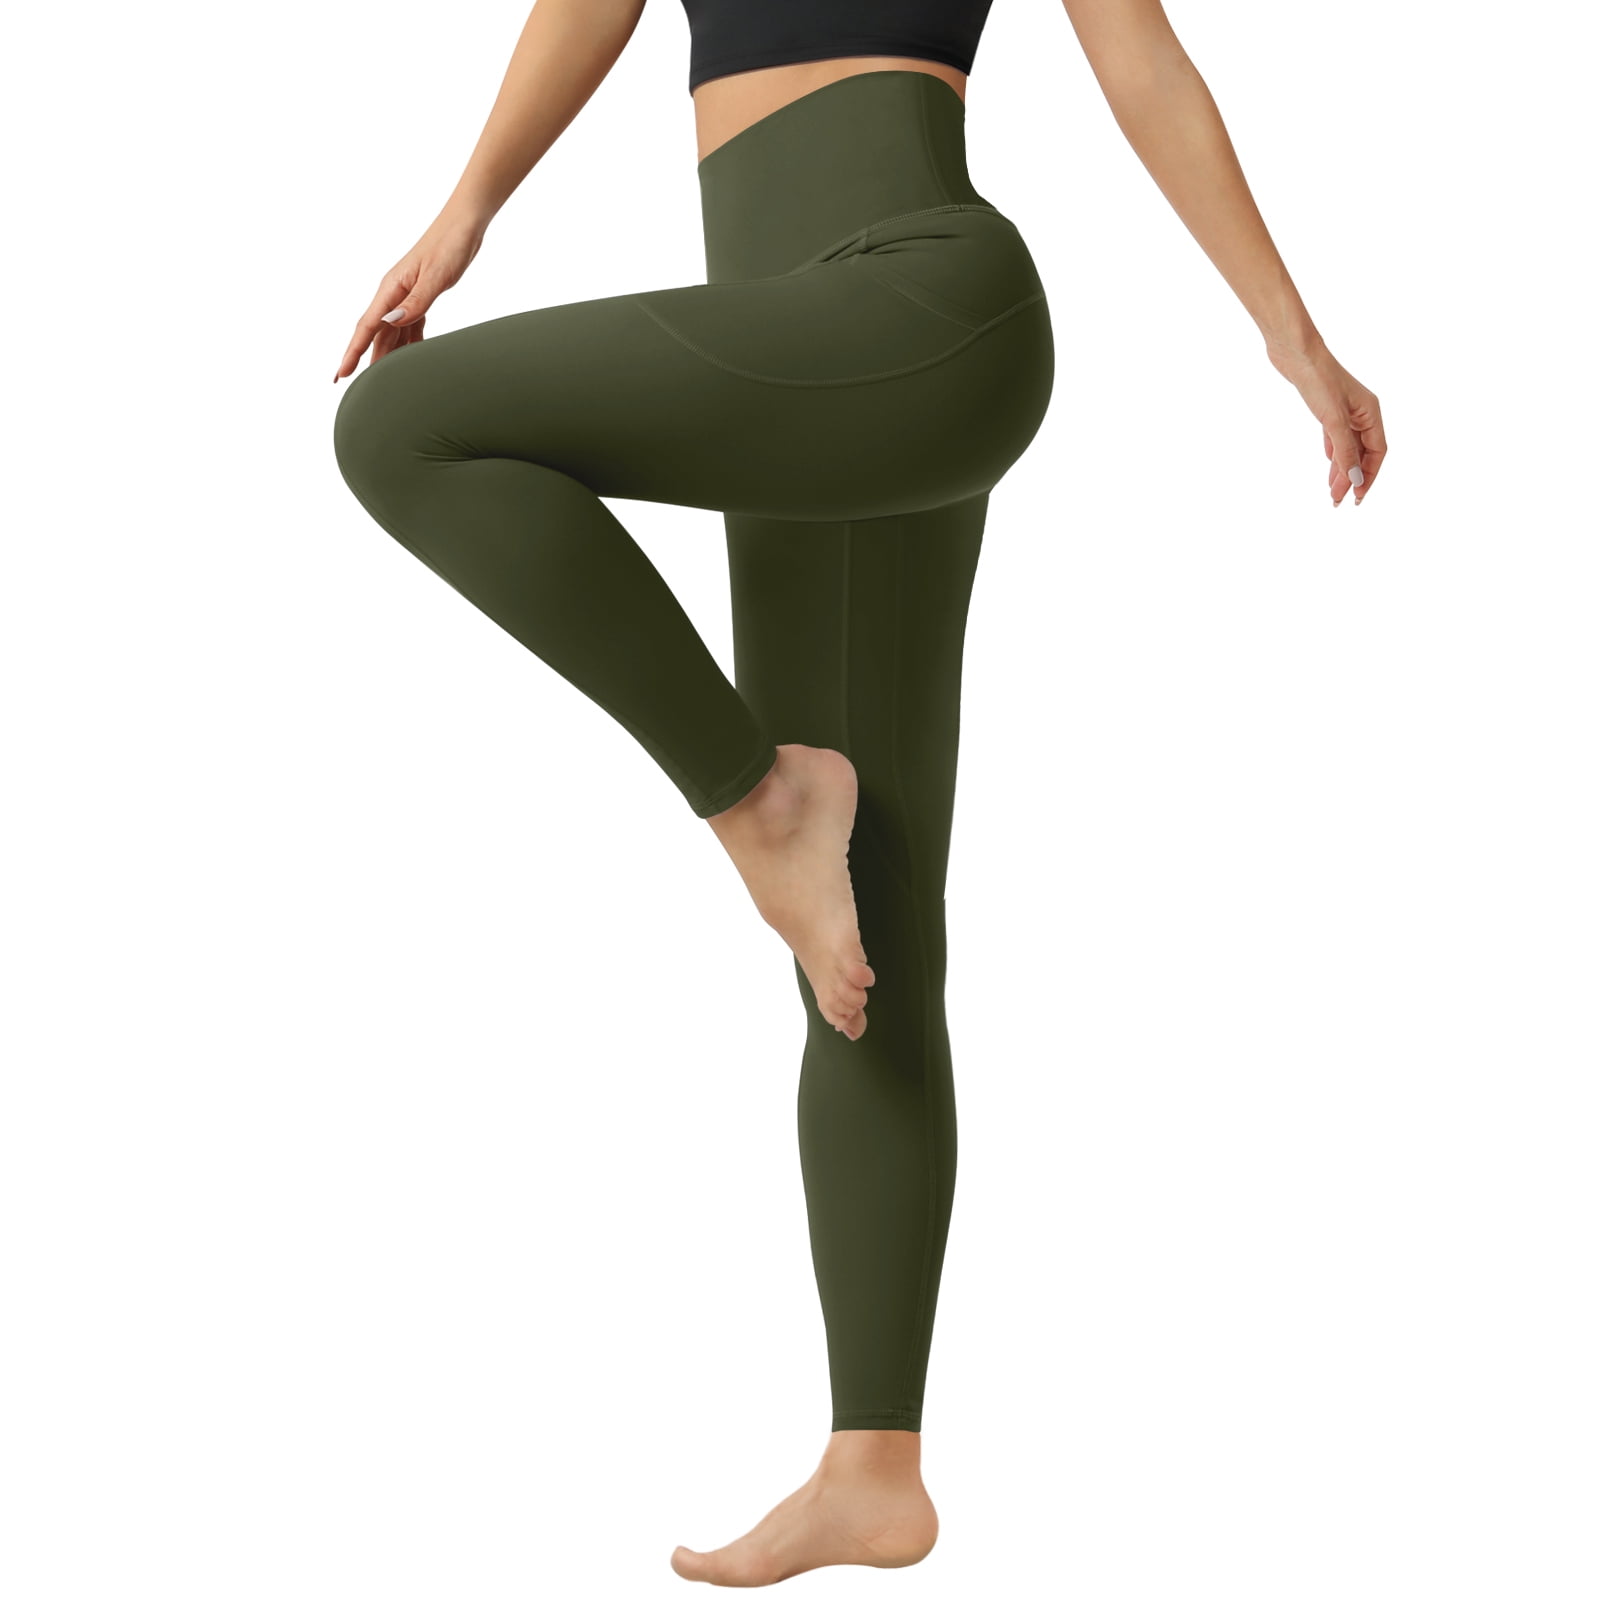 Women's Sports Yoga Leggings Running Gym Workout Pants Fitness Stretch Trousers